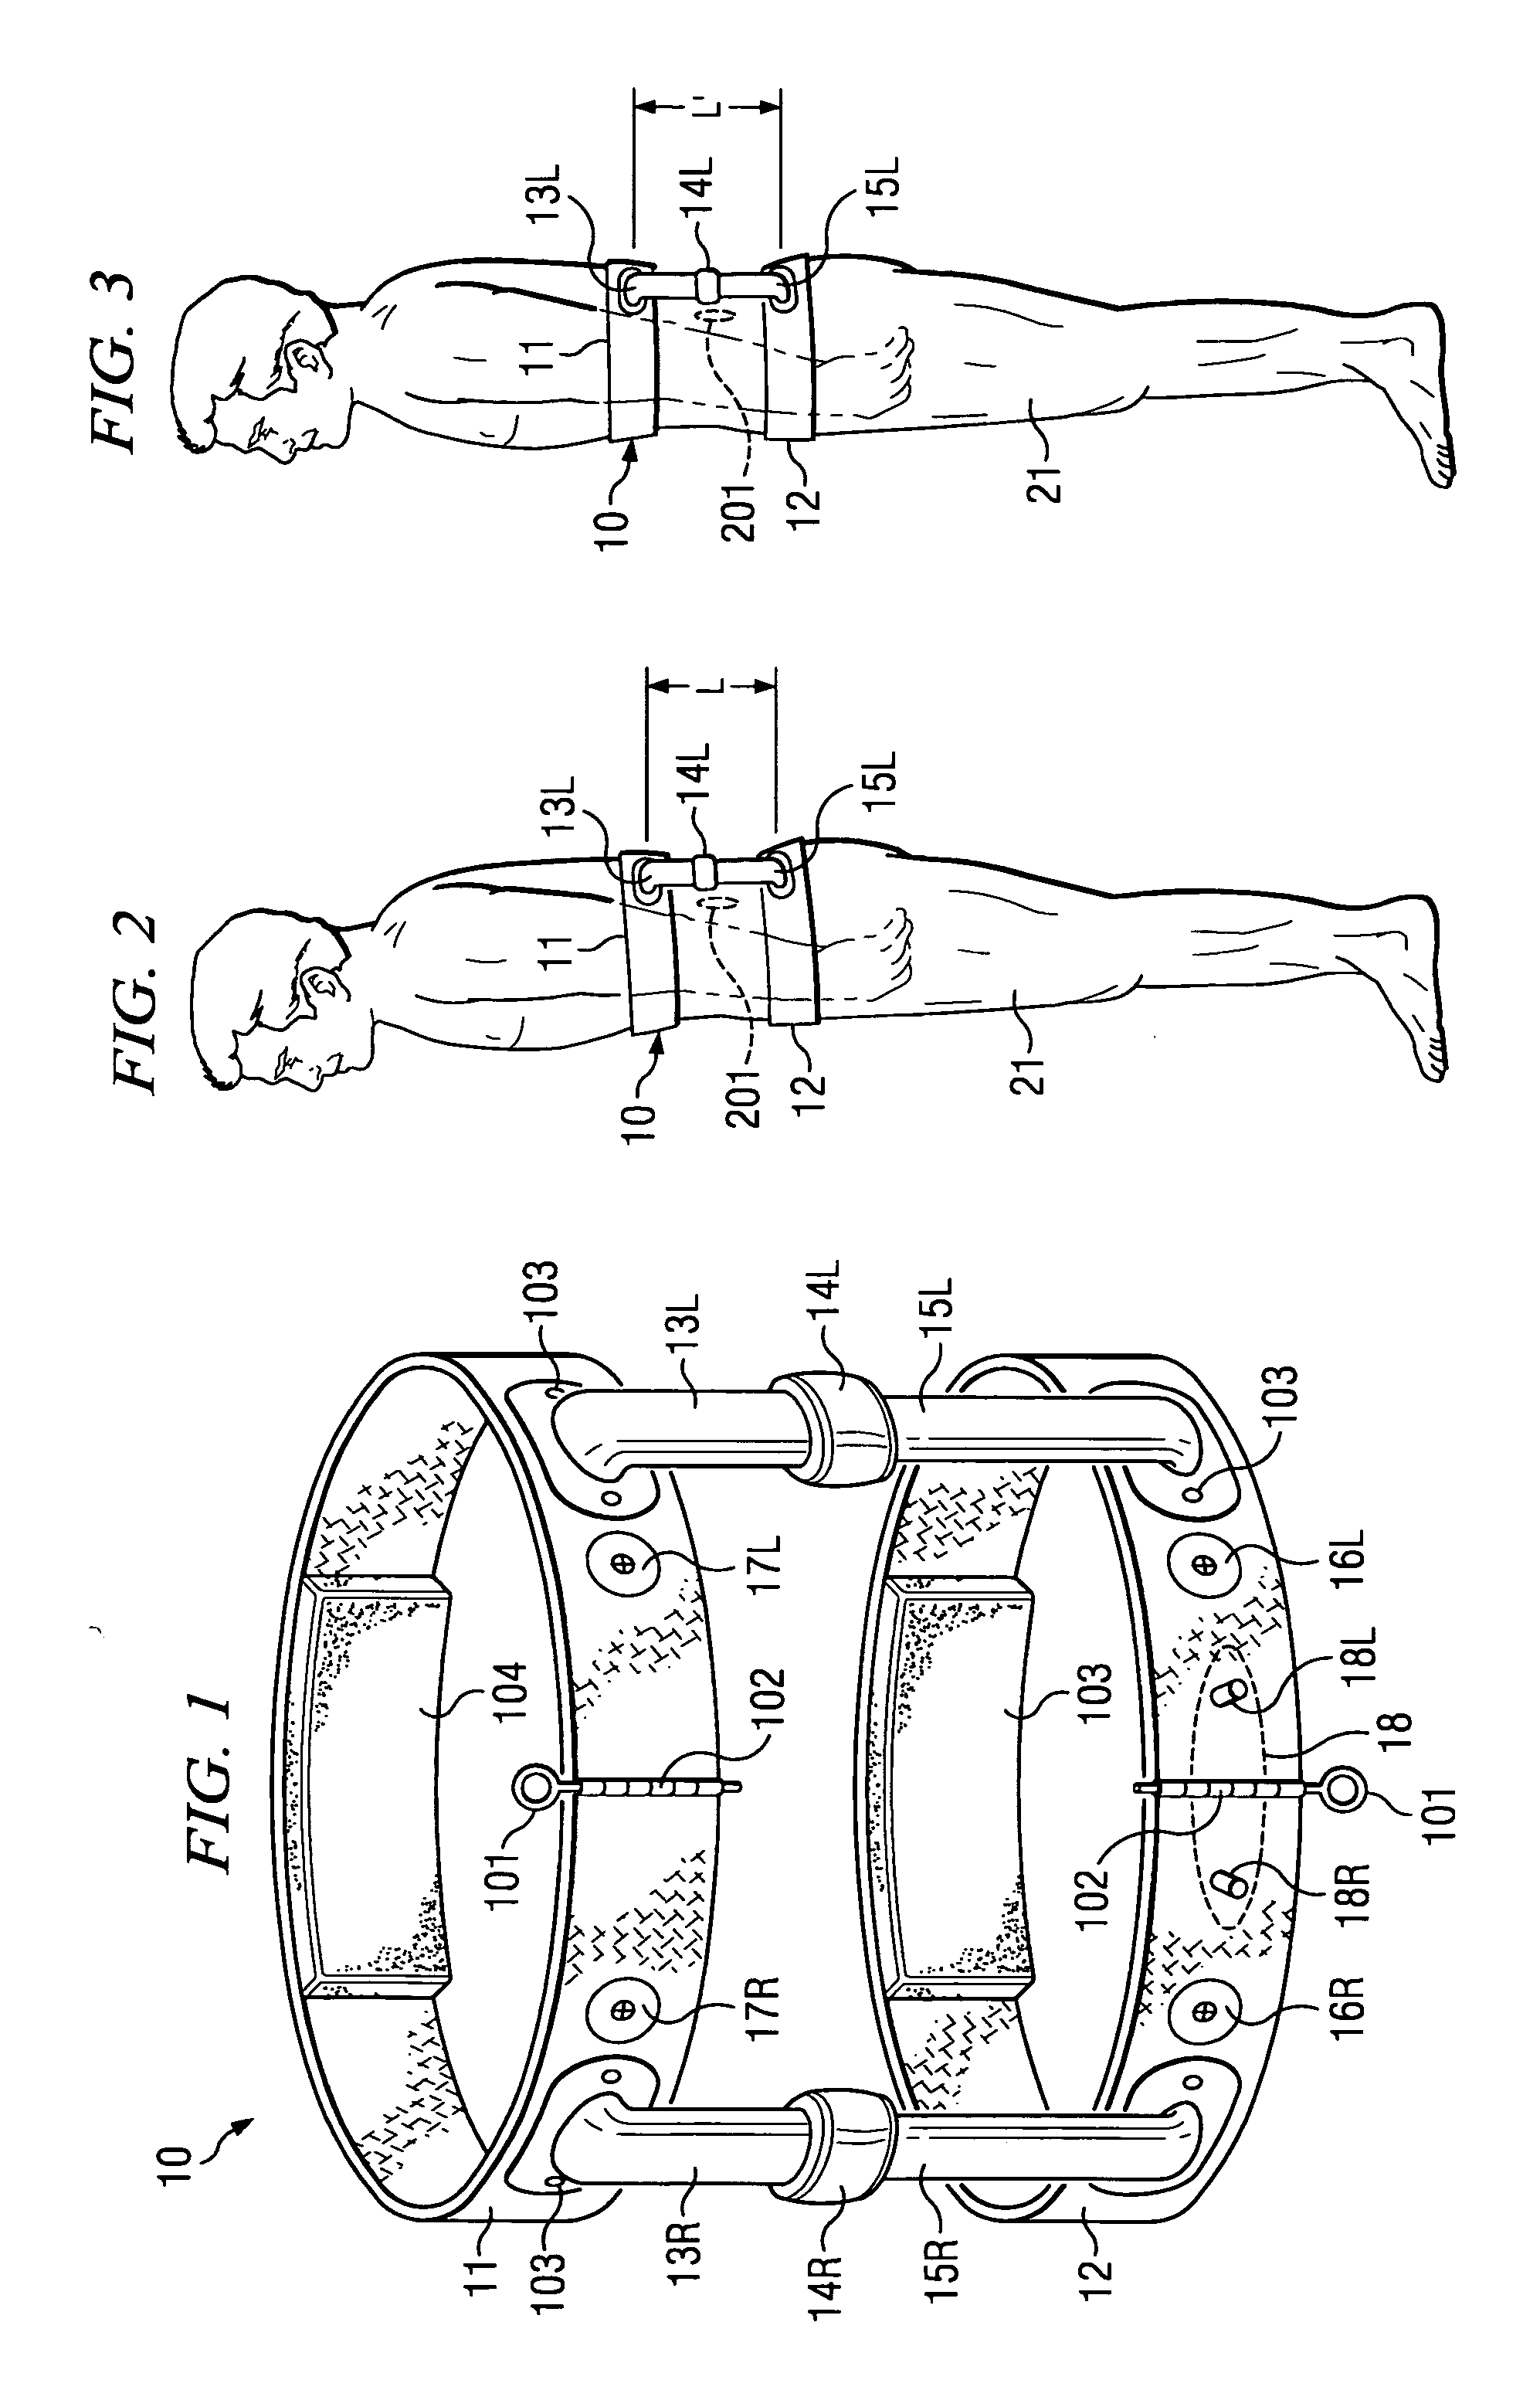 System and method for externally controlled surgical navigation